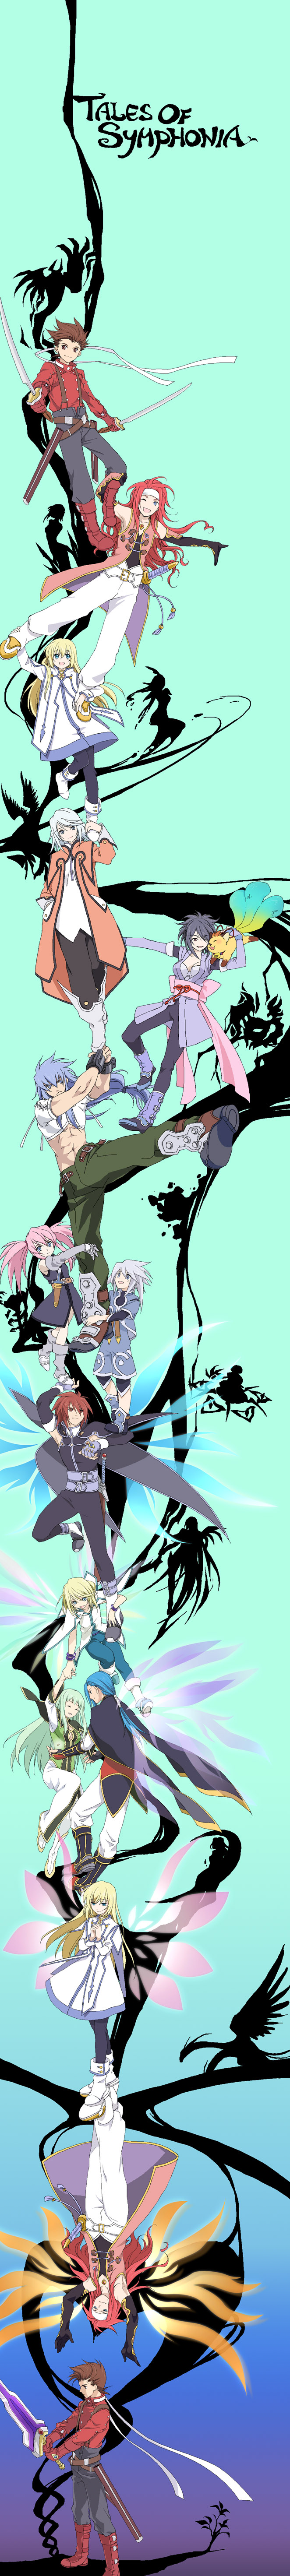 6+girls absurdres alternate_wings aska_(tales) collet_brunel commentary_request corrine dual_wielding durarara!! everyone fujibayashi_shiina genius_sage gnome_(tales) highres holding ifrit_(tales) iwatsuki kratos_aurion lloyd_irving long_image luna_(tos) martel_(tales) maxwell_(tales) mithos_yggdrasill multiple_boys multiple_girls one_eye_closed origin_(tales) presea_combatir refill_sage regal_bryan shadow_(tales) sword sylph_(tales) tales_of_(series) tales_of_symphonia tall_image trust_me undine_(tales) volt weapon wings yuan_(tales) zelos_wilder